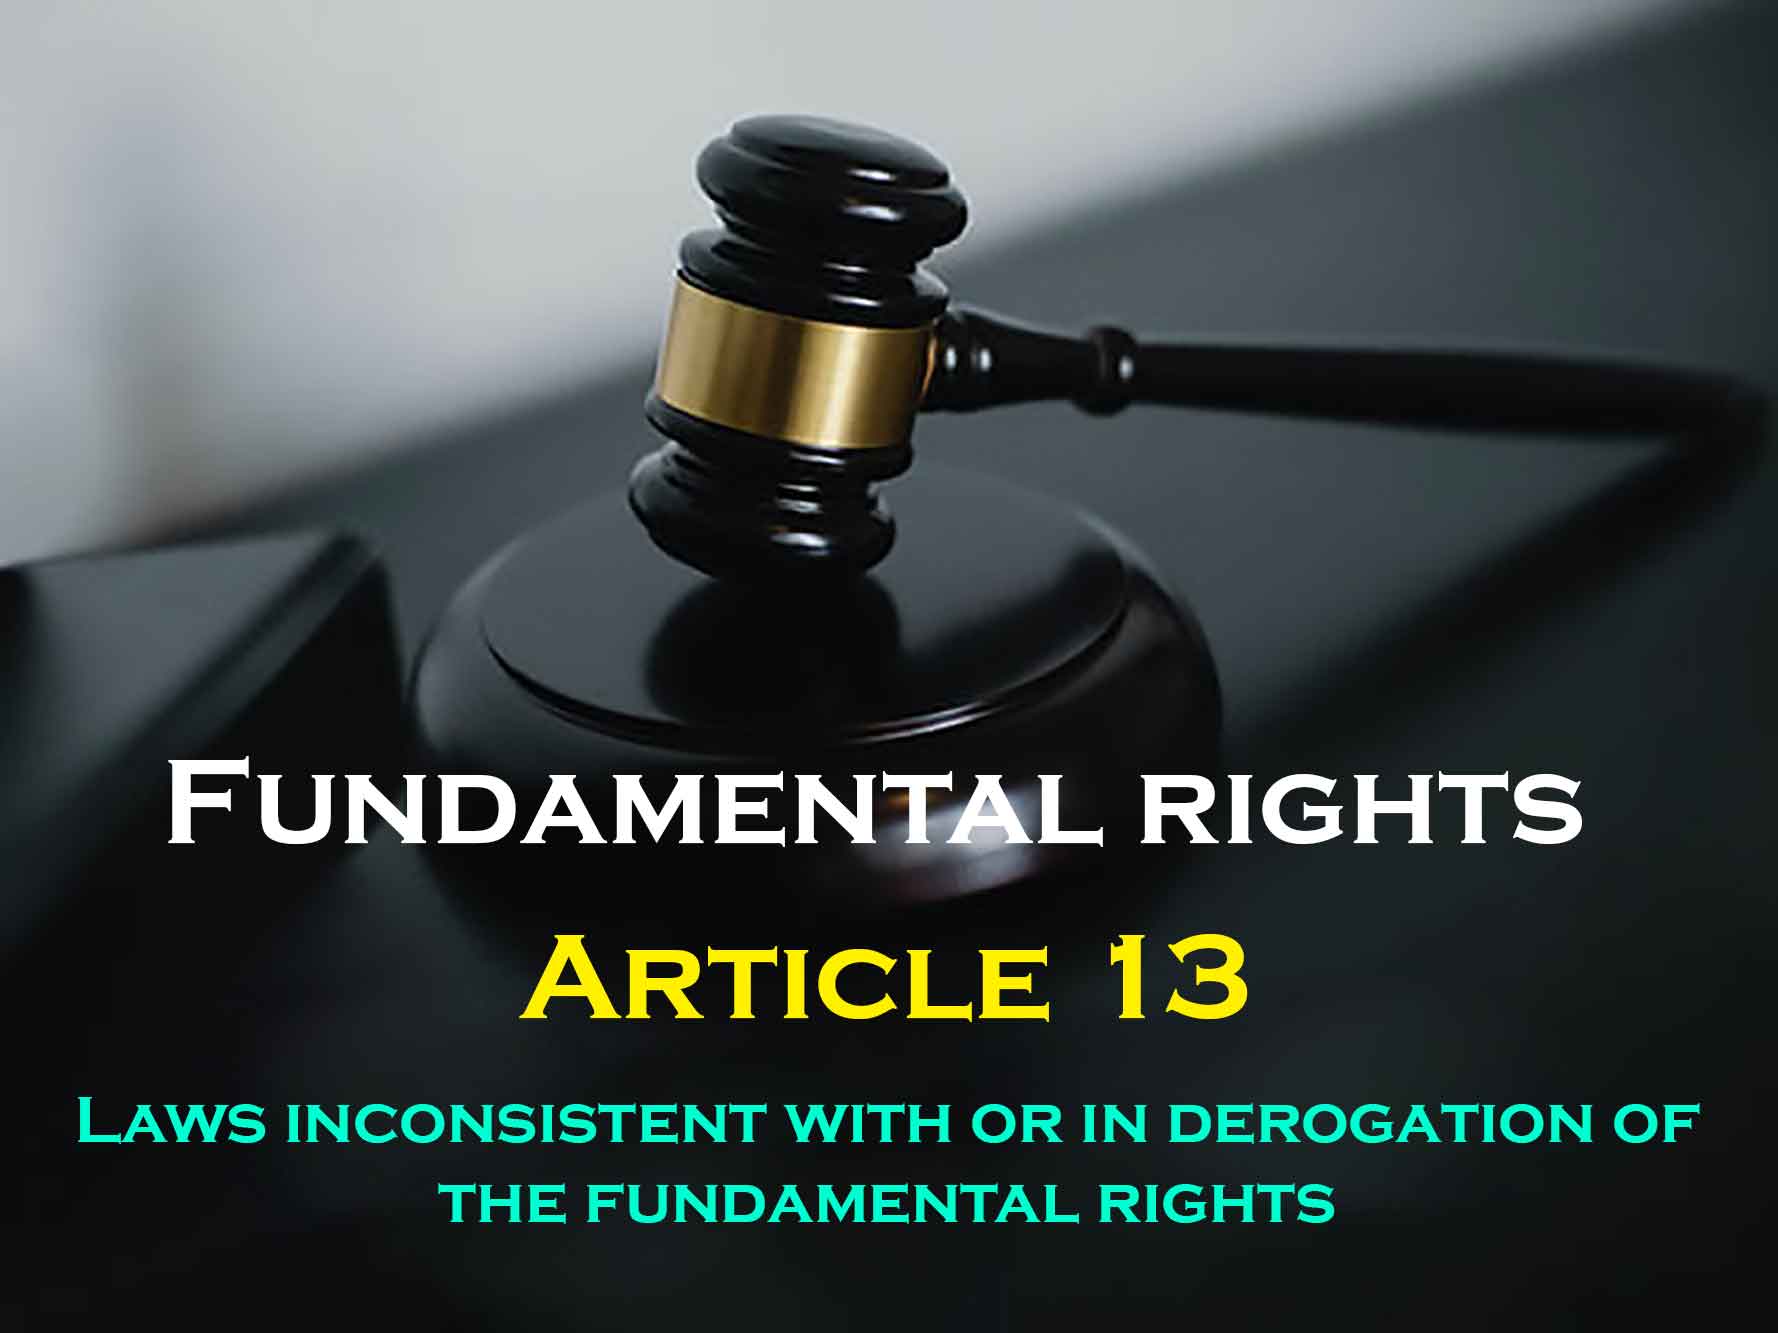 Article 13 – Laws inconsistent with or in derogation of the Fundamental Rights.